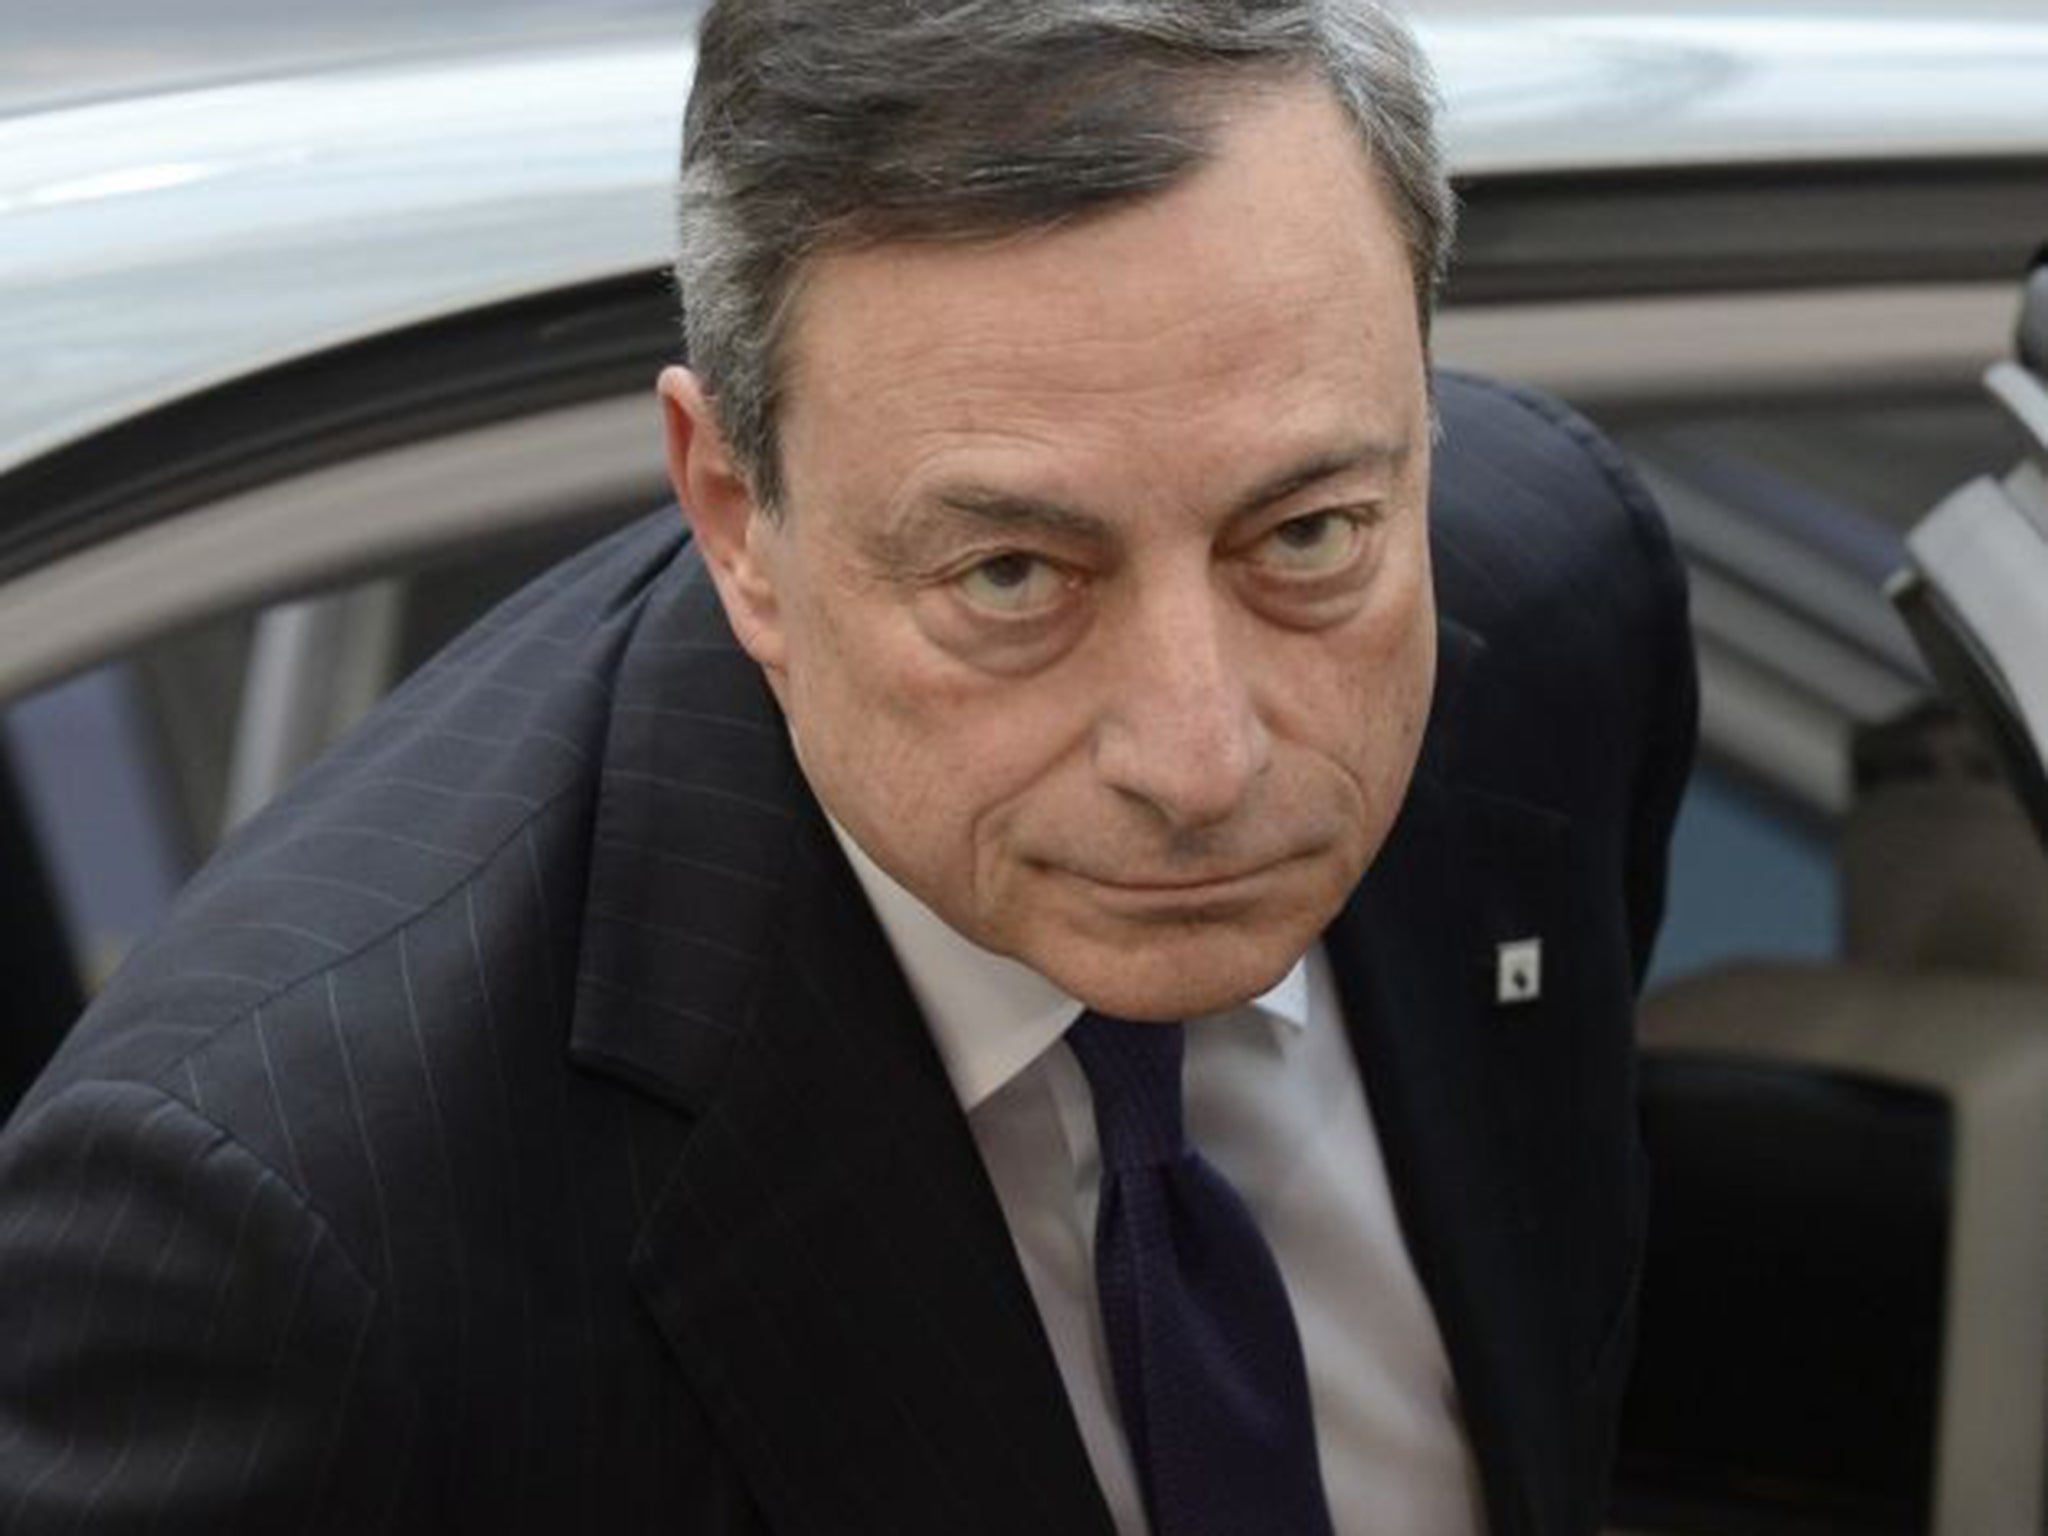 ECB president Mario Draghi’s comments last week caused the euro to spike up to $1.12